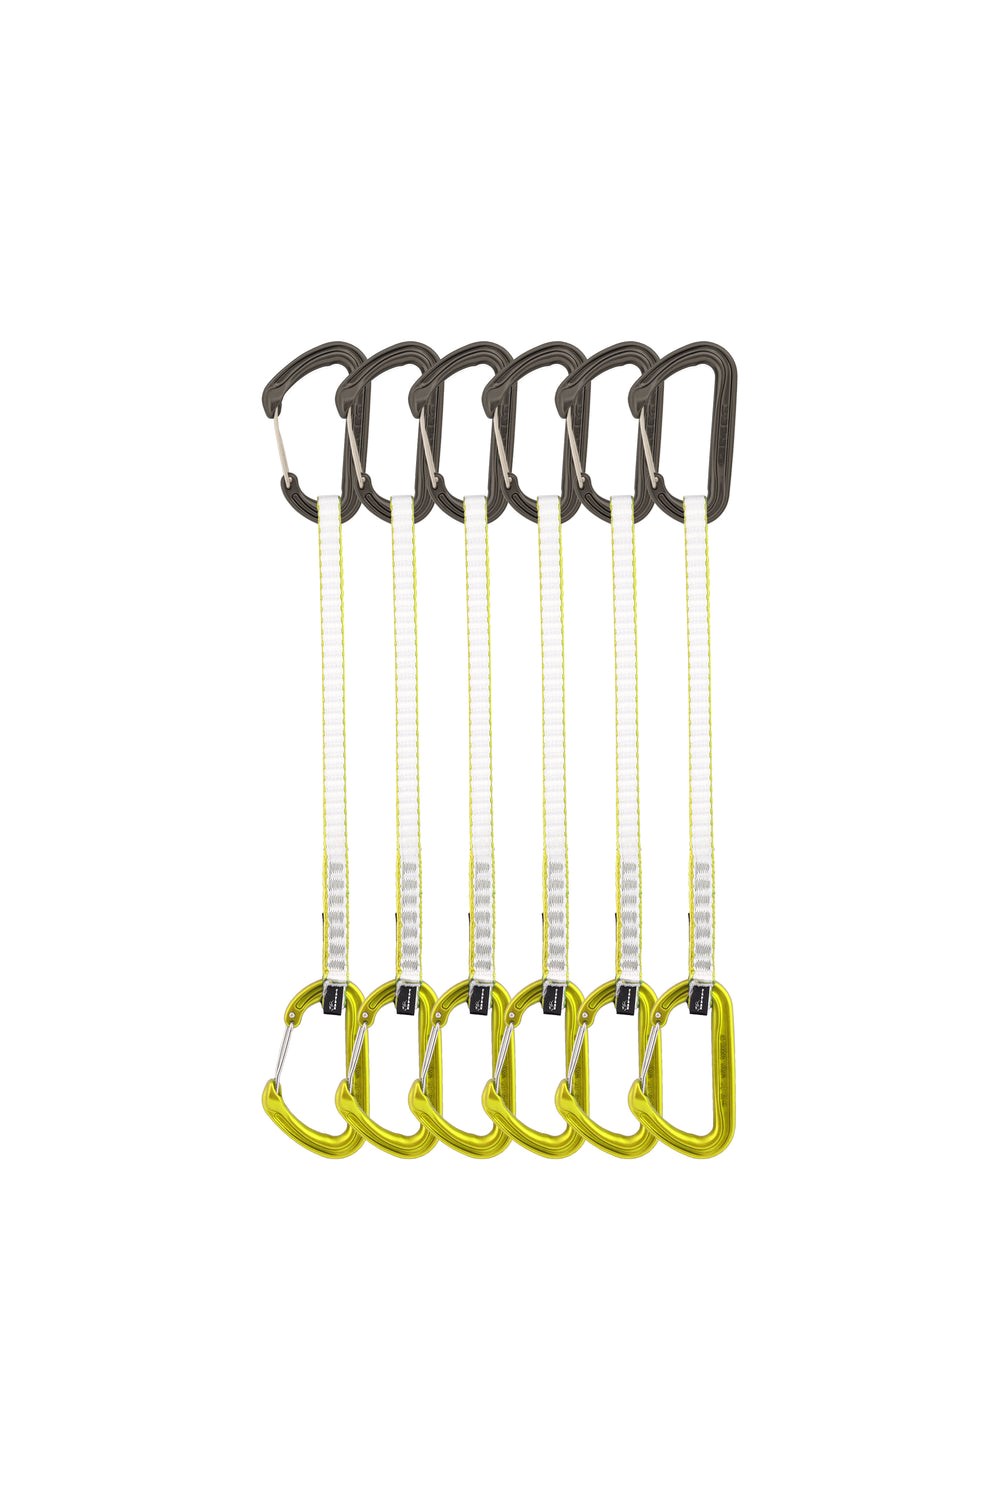 Chimera Quickdraw for Rock Climbing 6-Pack -